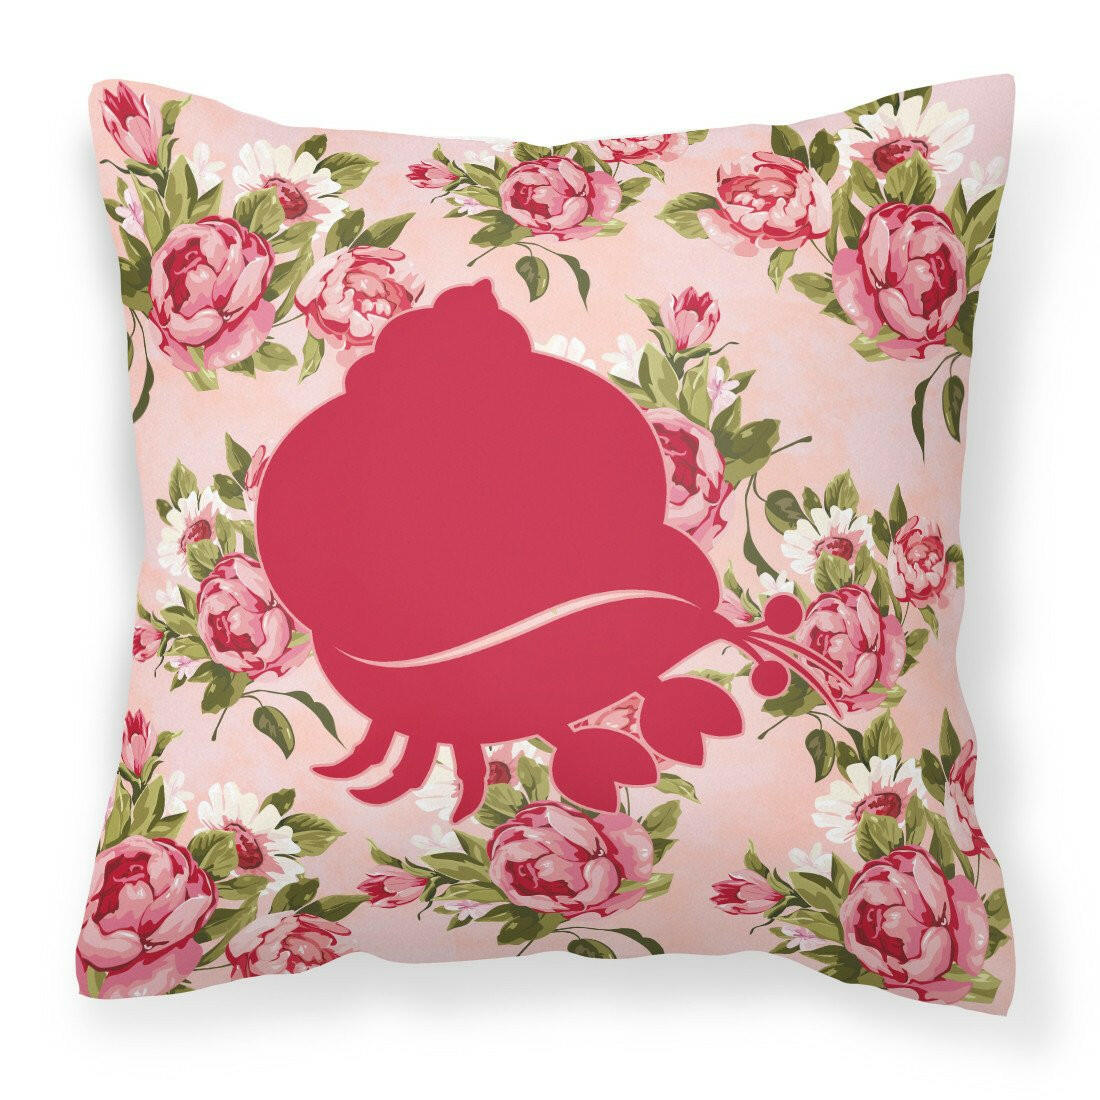 Hermit Crab Shabby Chic Pink Roses  Fabric Decorative Pillow BB1102-RS-PK-PW1414 - the-store.com